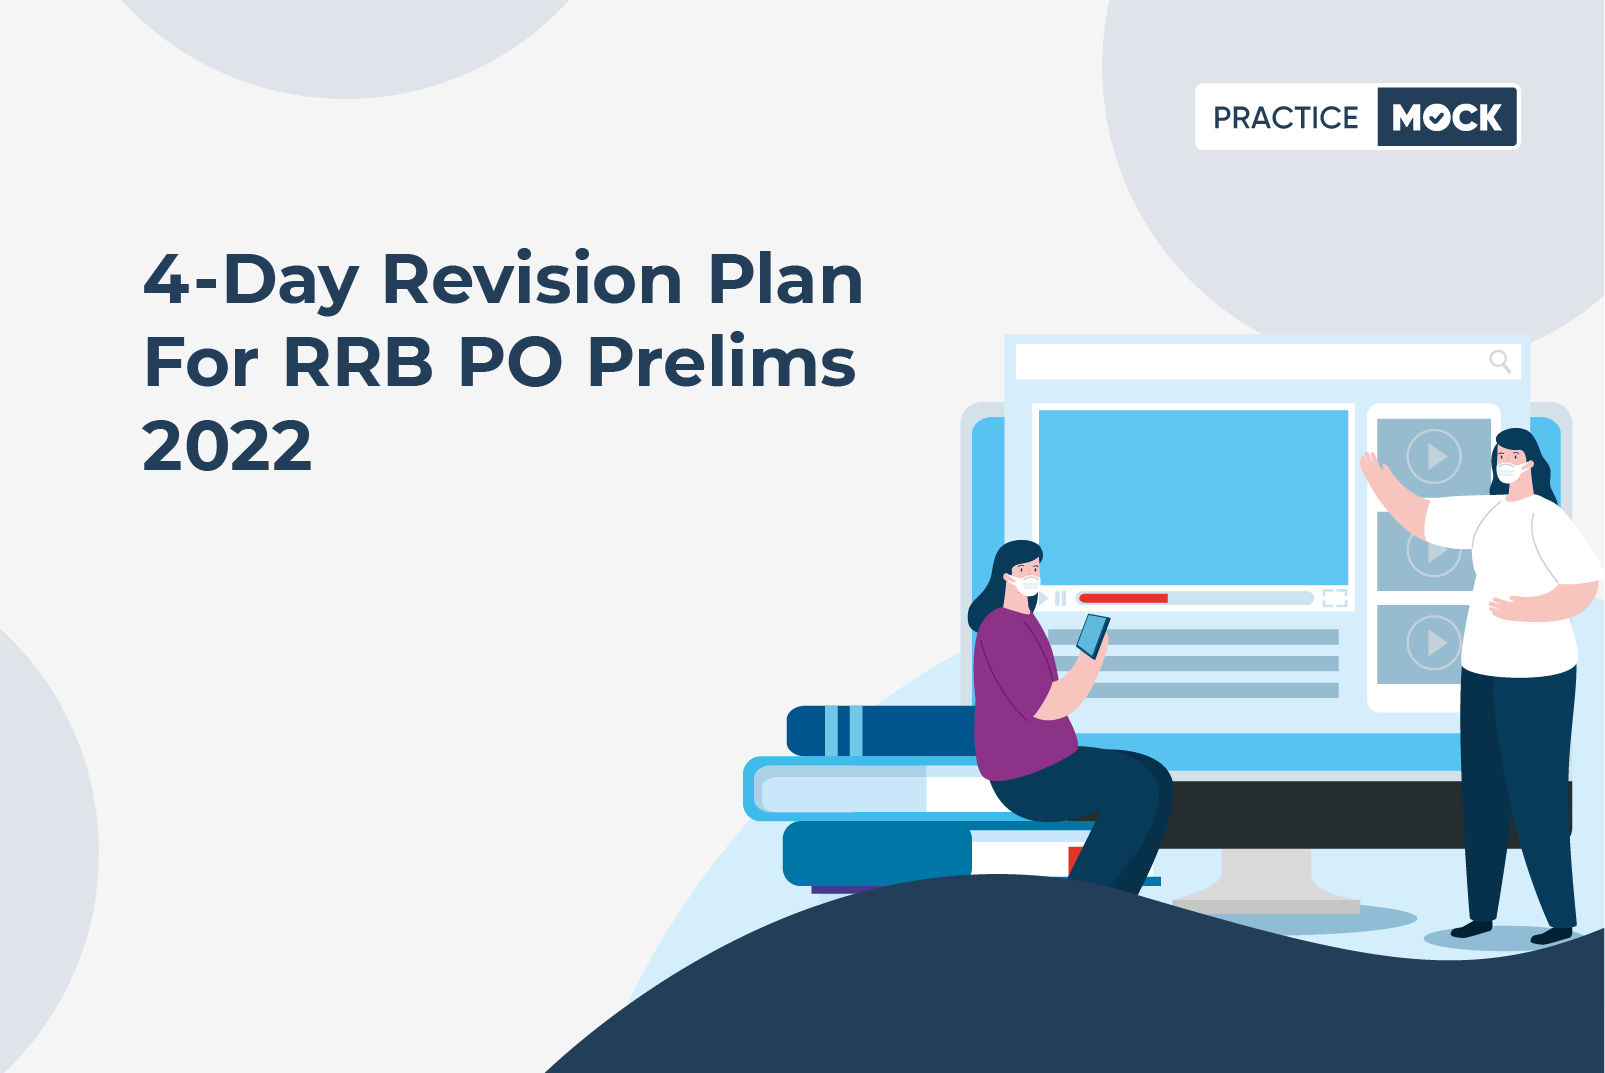 4-Day Revision Plan for RRB PO Prelims 2022